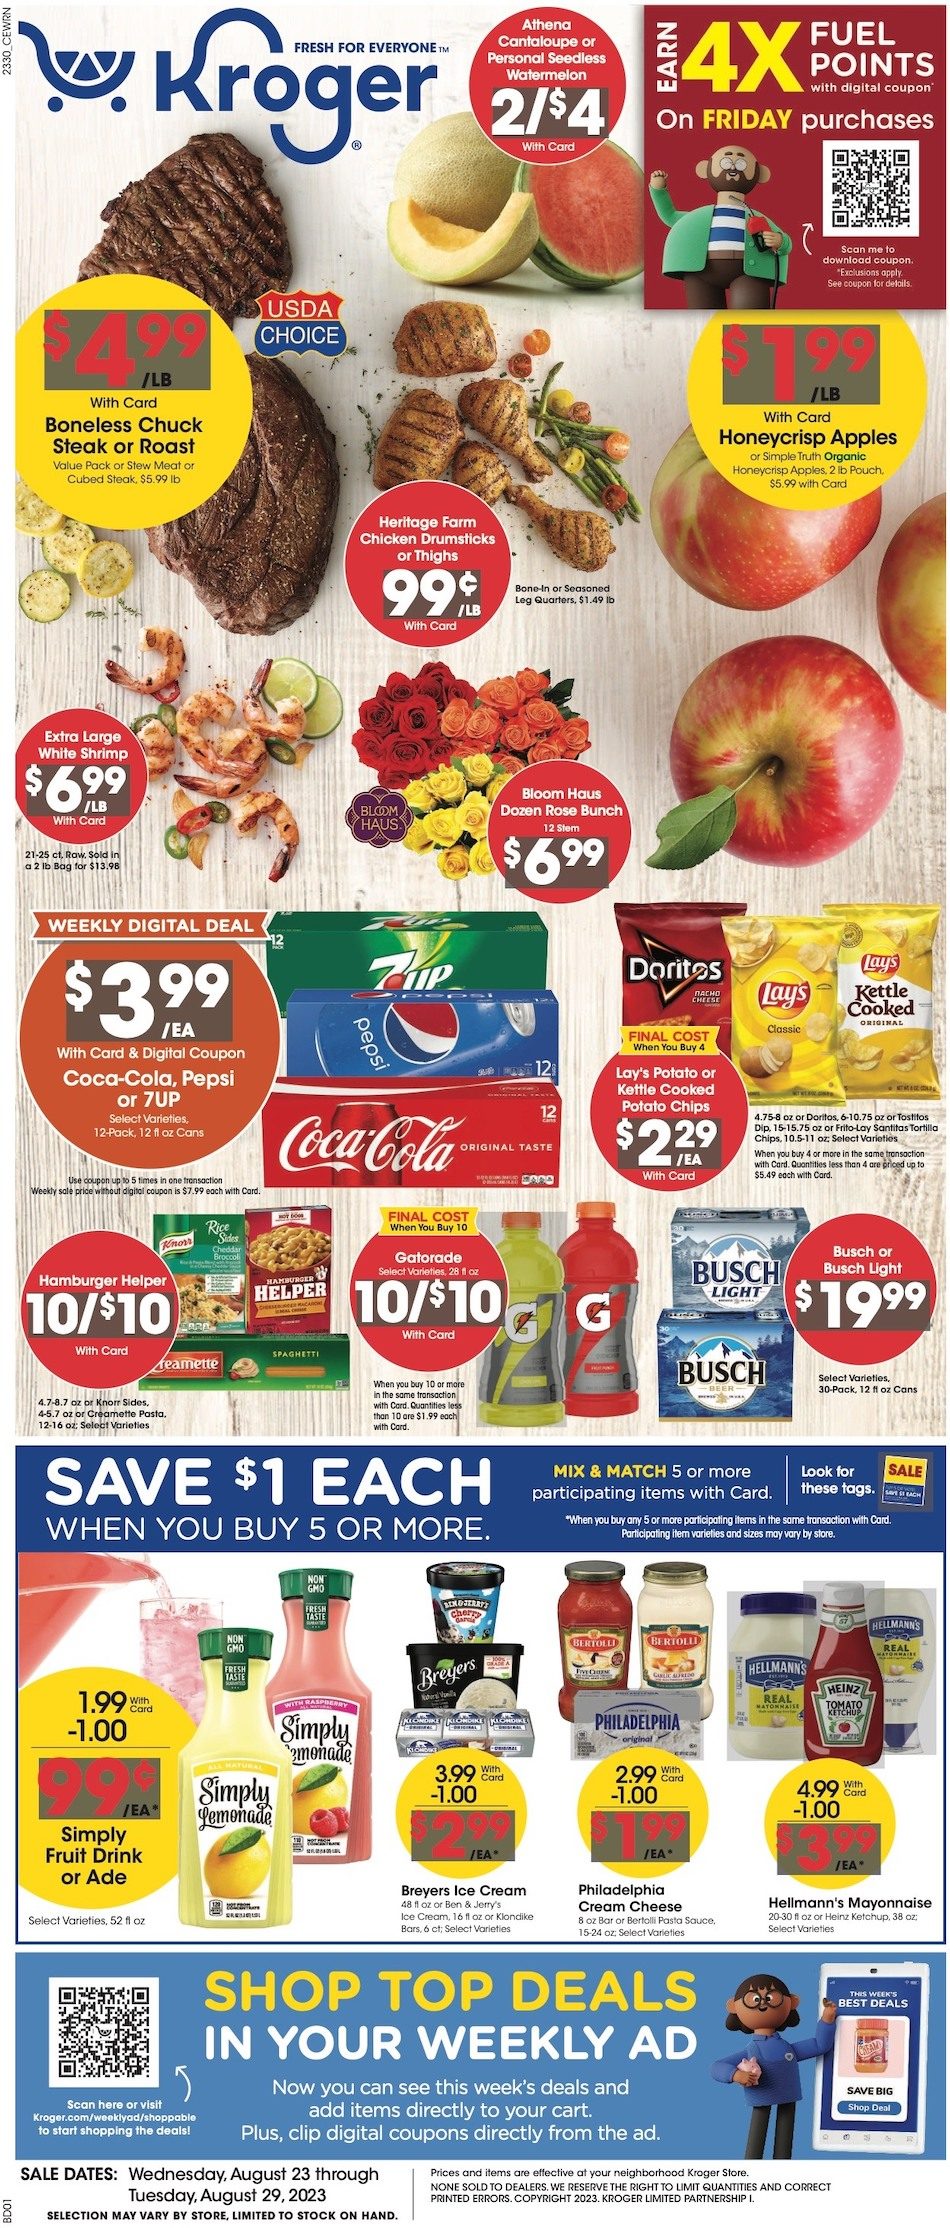 Kroger Weekly Ad 23rd – 29th August 2023 Page 1